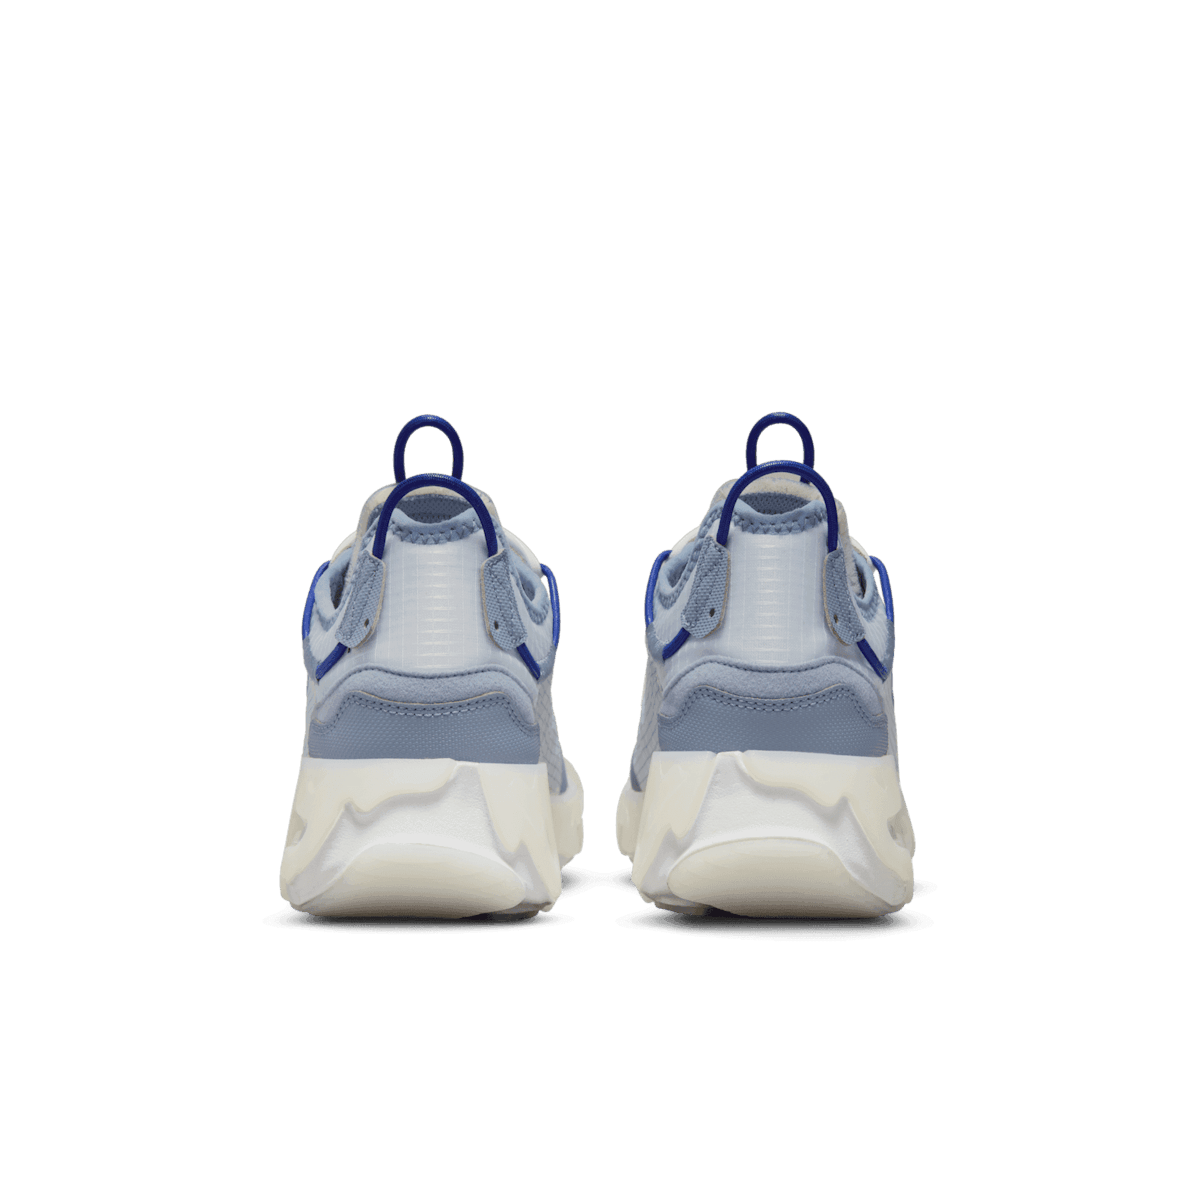 Nike React Live Shoes in Grey - CV1772-005 Raffles and Release Date